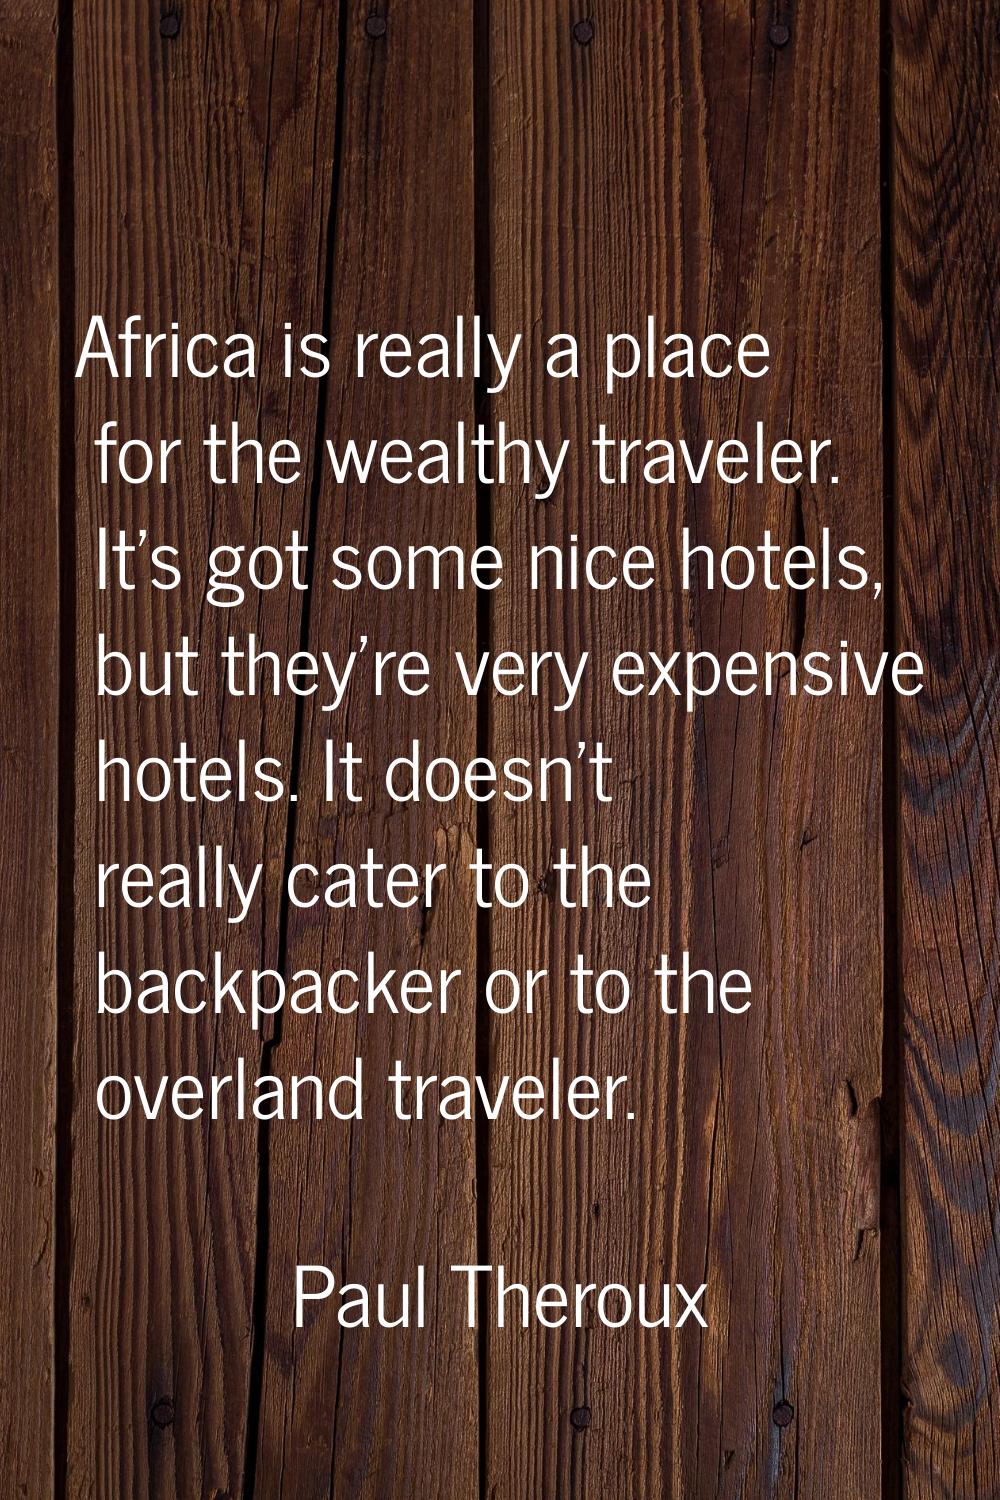 Africa is really a place for the wealthy traveler. It's got some nice hotels, but they're very expe